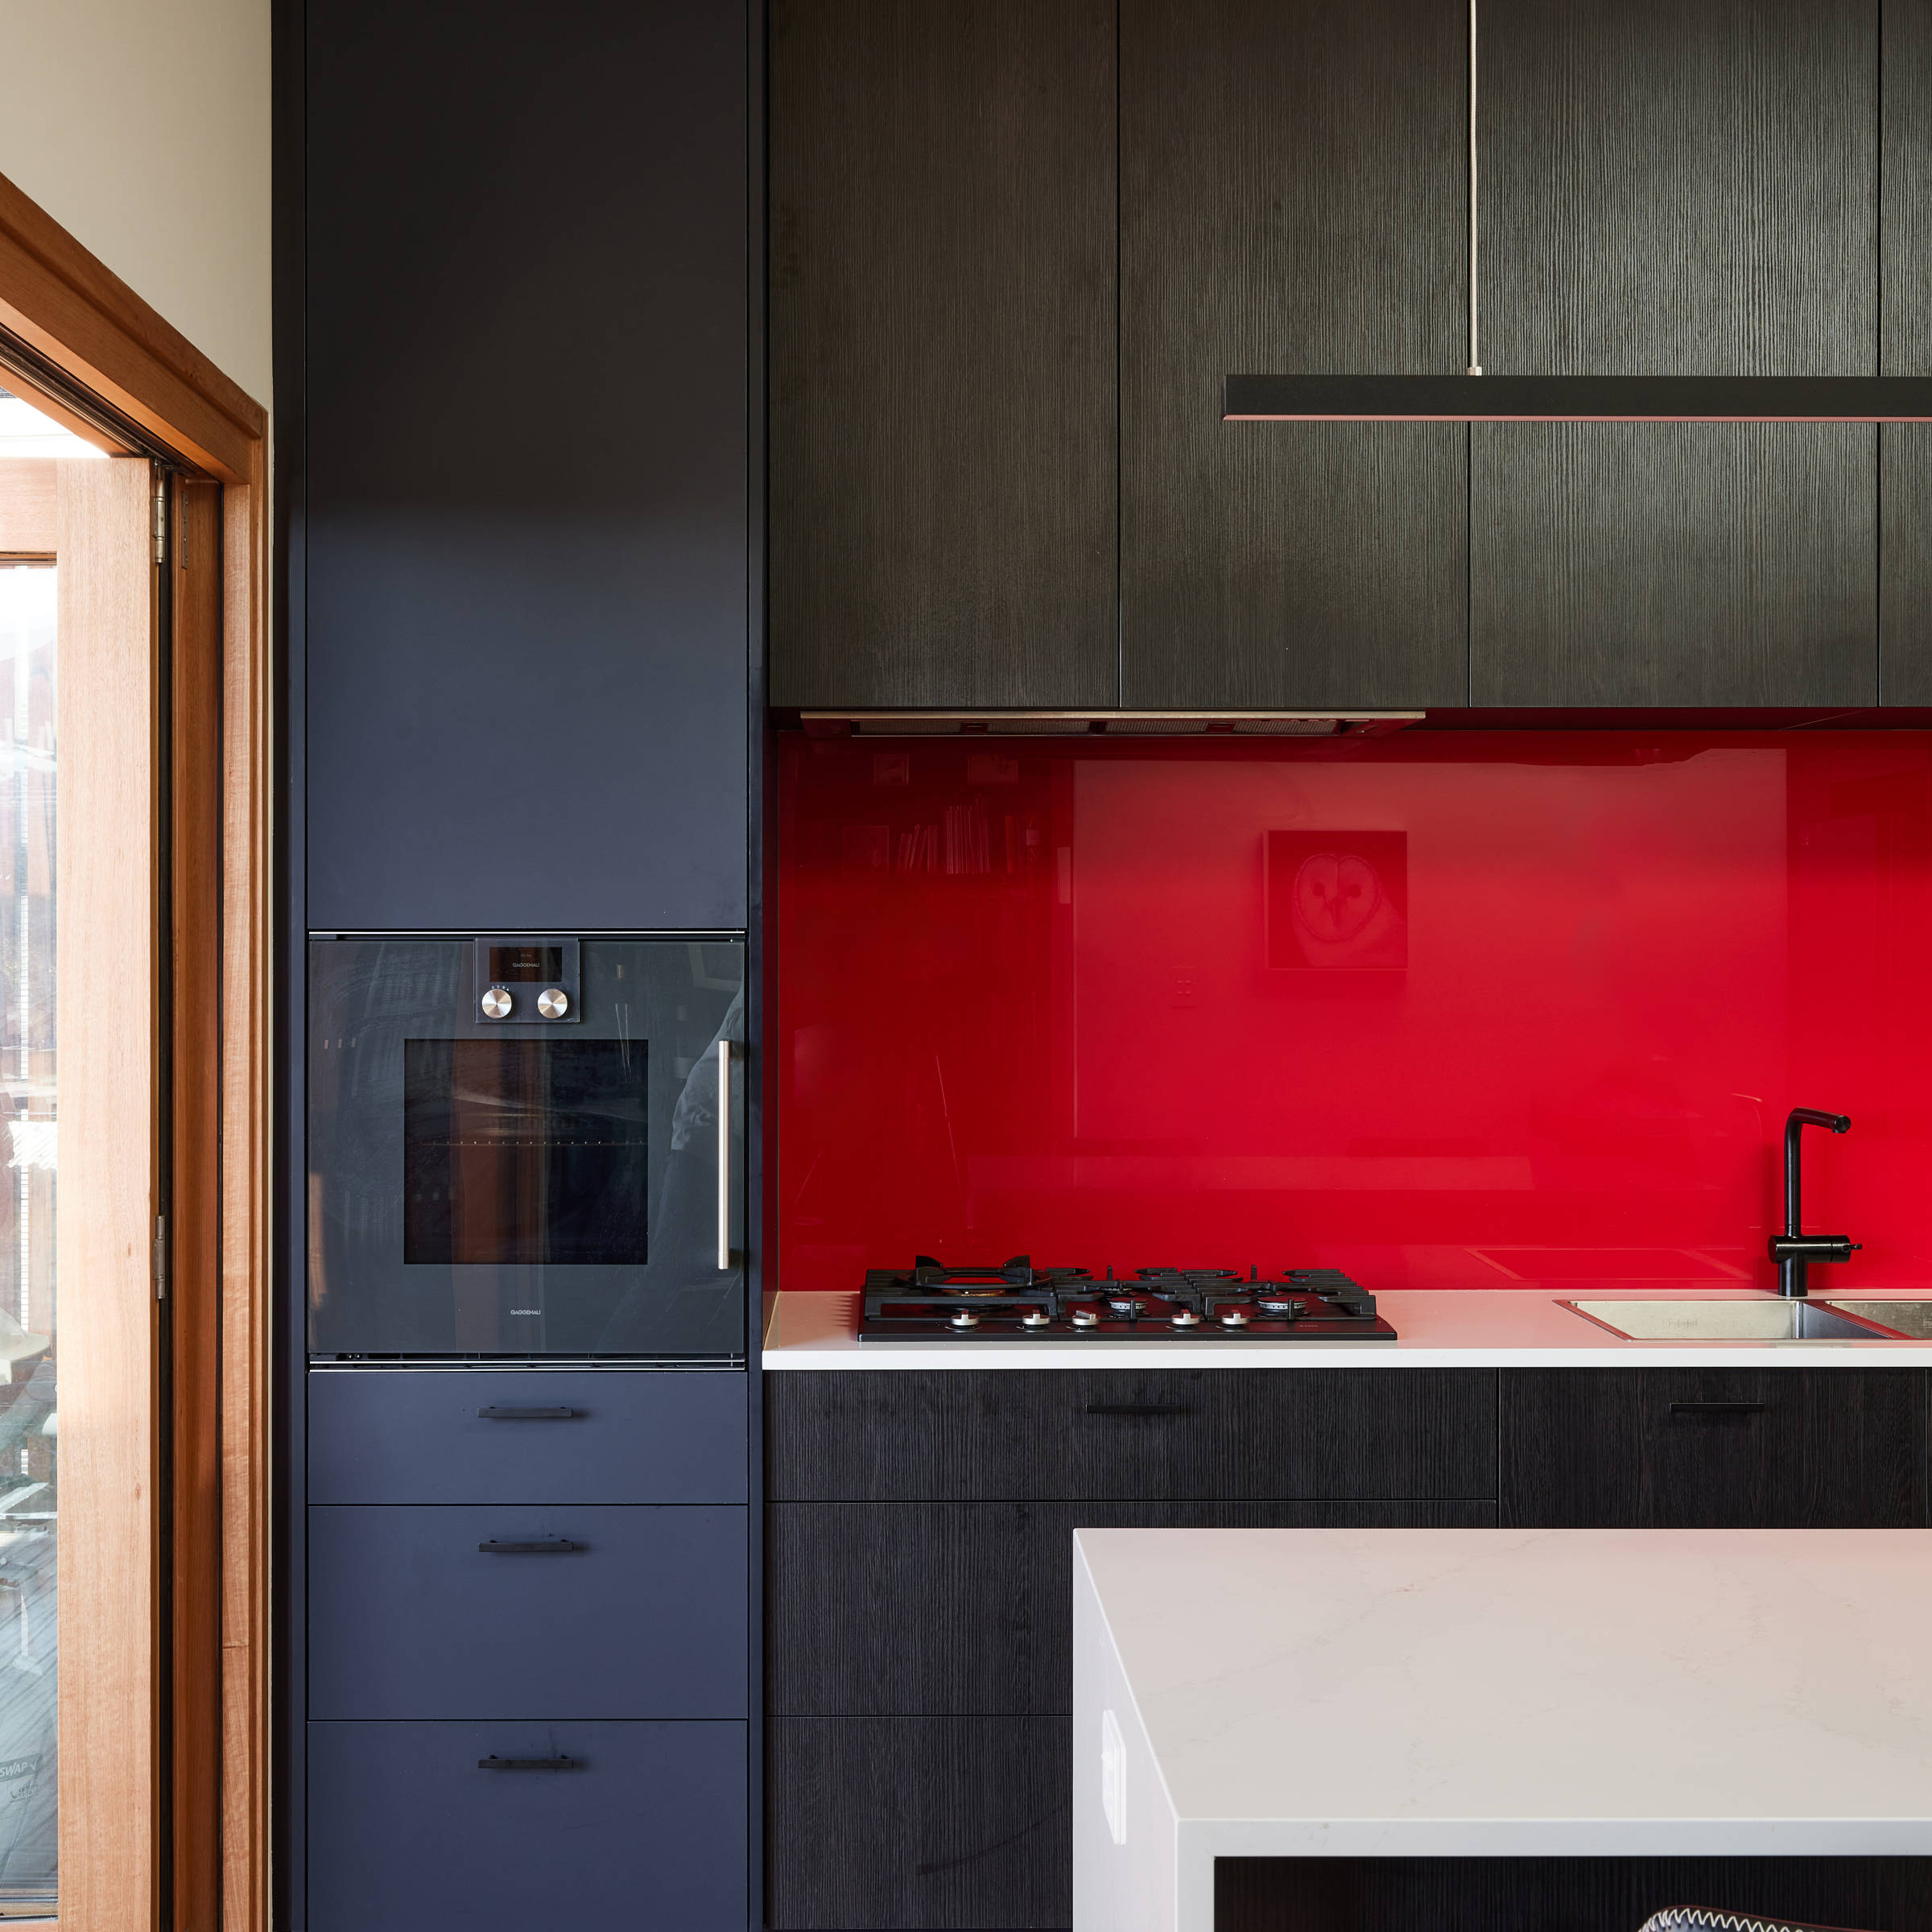 Kitchen leading onto a timber deck through timber framed bifold doors. The kitchen features black cupboards with a visible timber grain, soft grey benchtops and a bright red splashback. The single column floor to ceiling cabinetry to the right of the red splashback is in a dark navy blue. There is an island bench with the same soft grey benchtop. The deck features upright spotted gum narrow timber panels in a symmetrical pattern and a timber table in the same timber tones. Credit: Samuel Shelley.